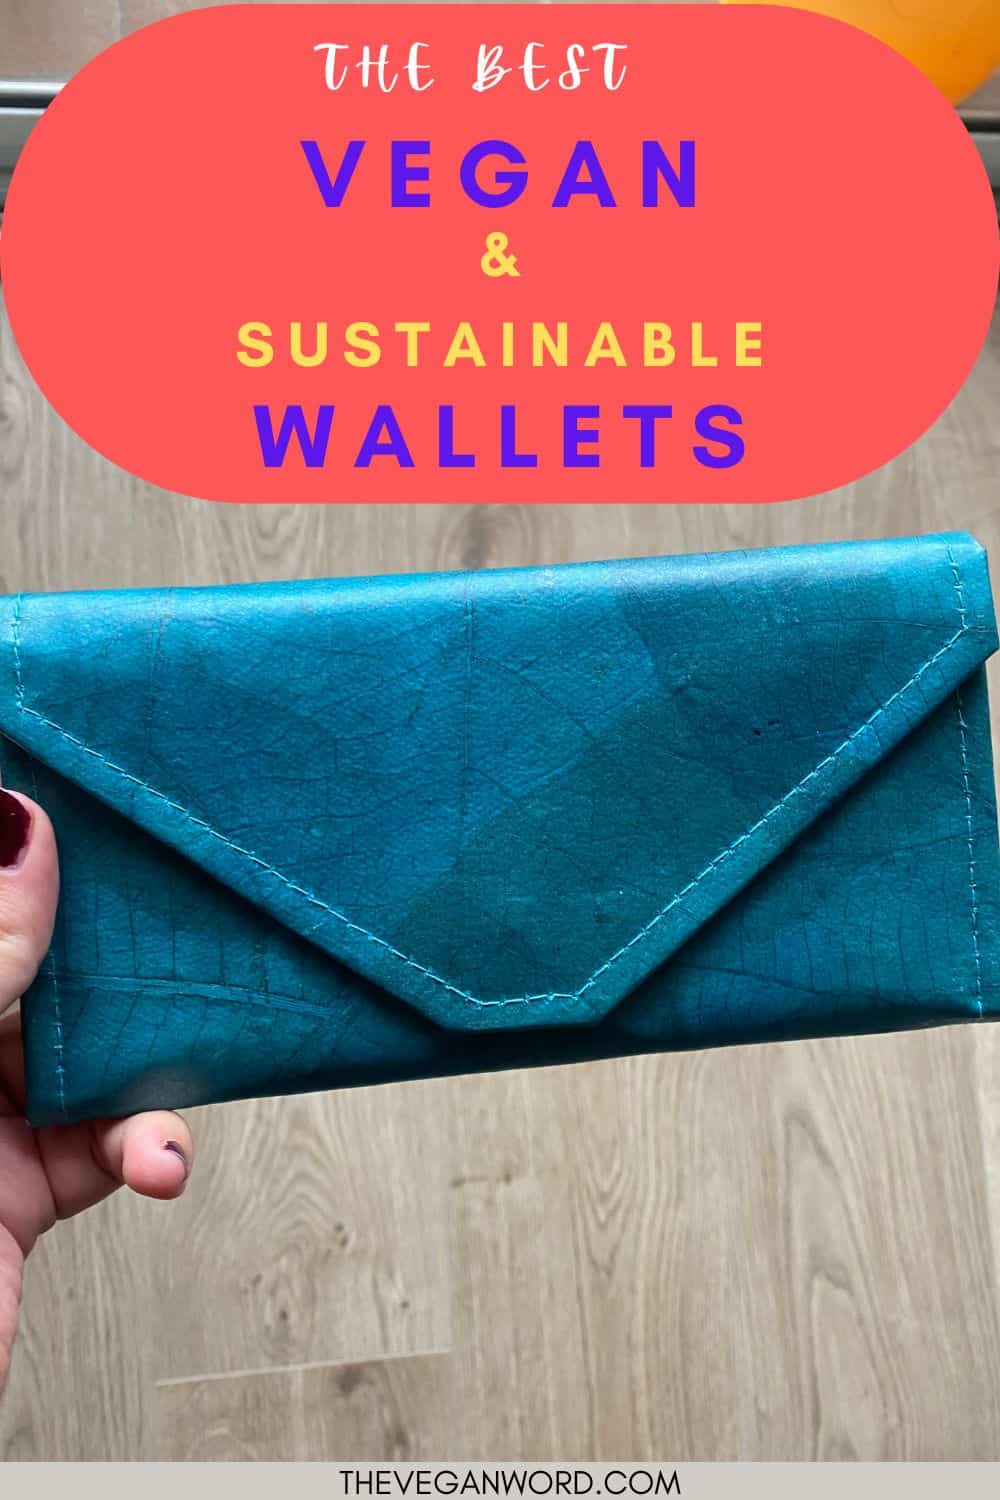 Pinterest image of a vegan leaf wallet (held by the author's hands) with text that reads "the best vegan  & sustainable wallets"